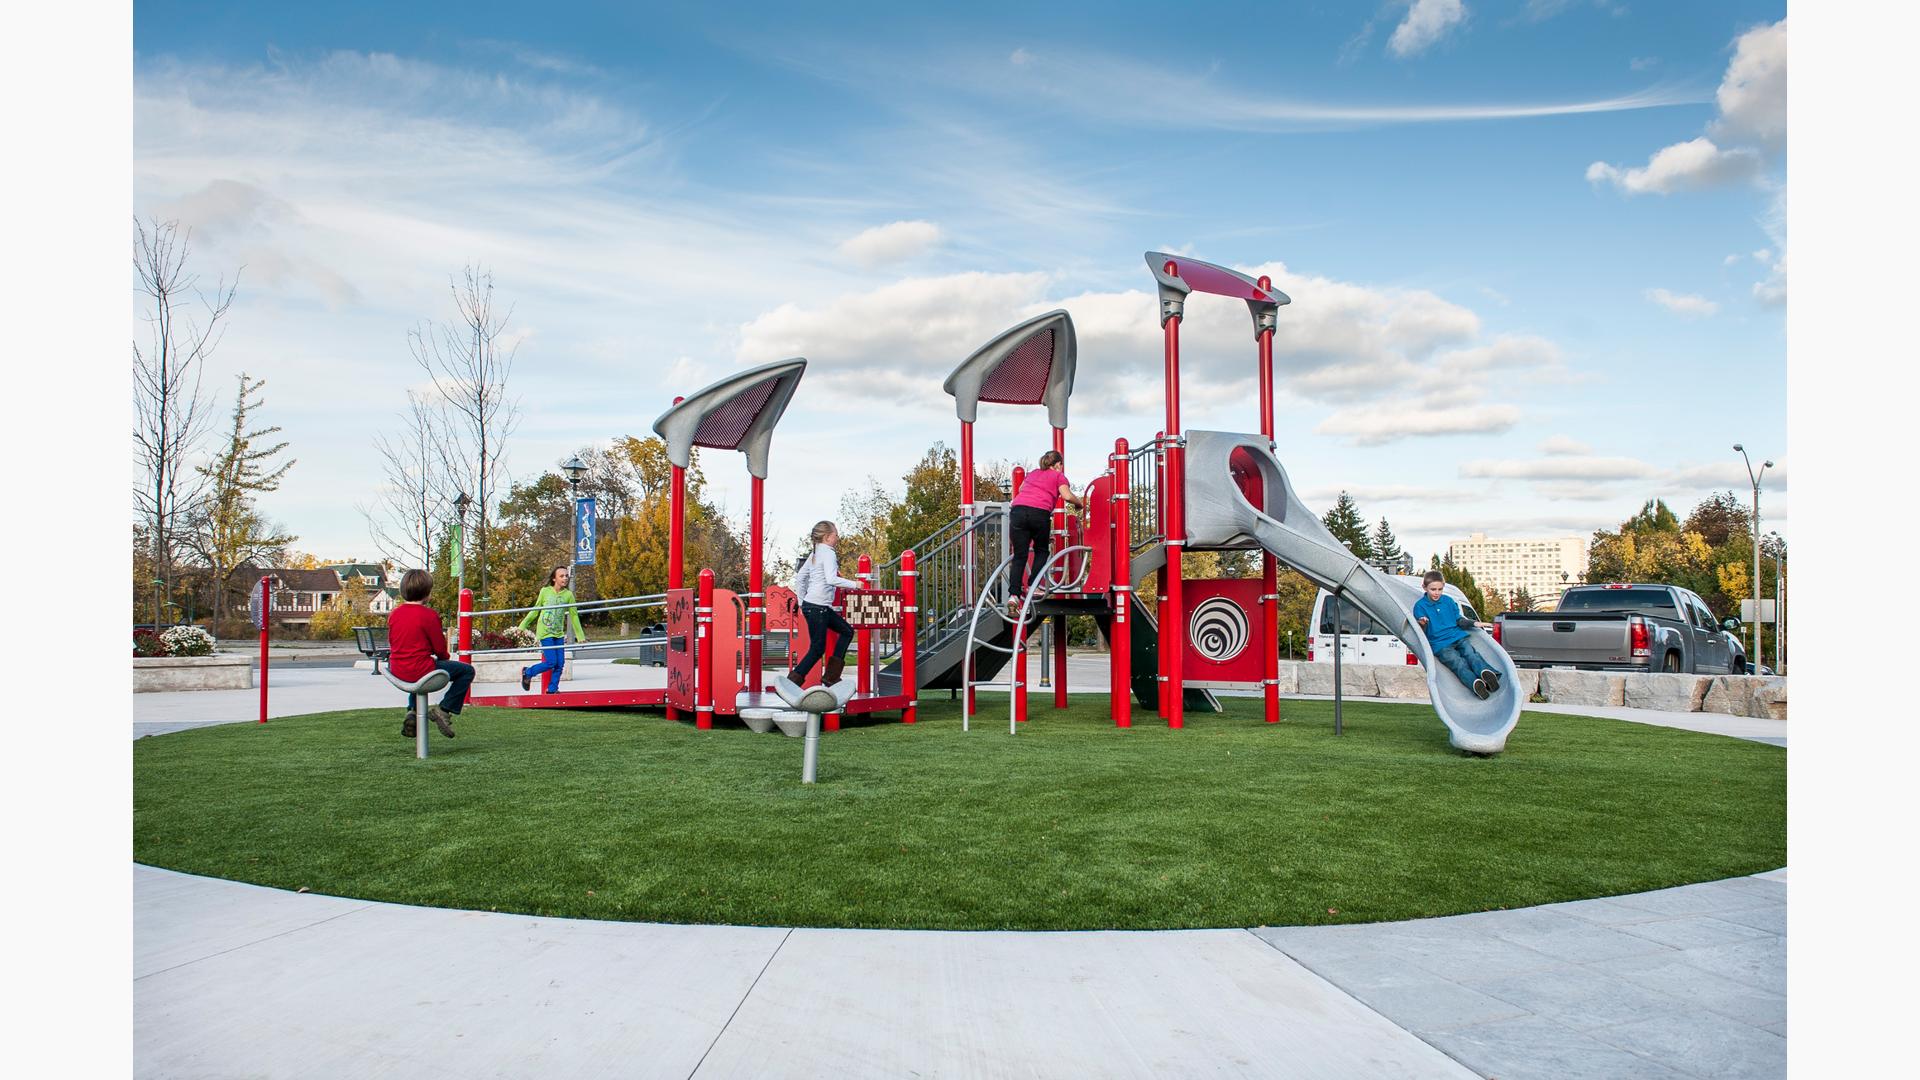 Sitting on a green, circular piece of grass, a boy rides down the slide while two girls running up the access ramp. Boy in red shirt sitting on Saddle Spinner.